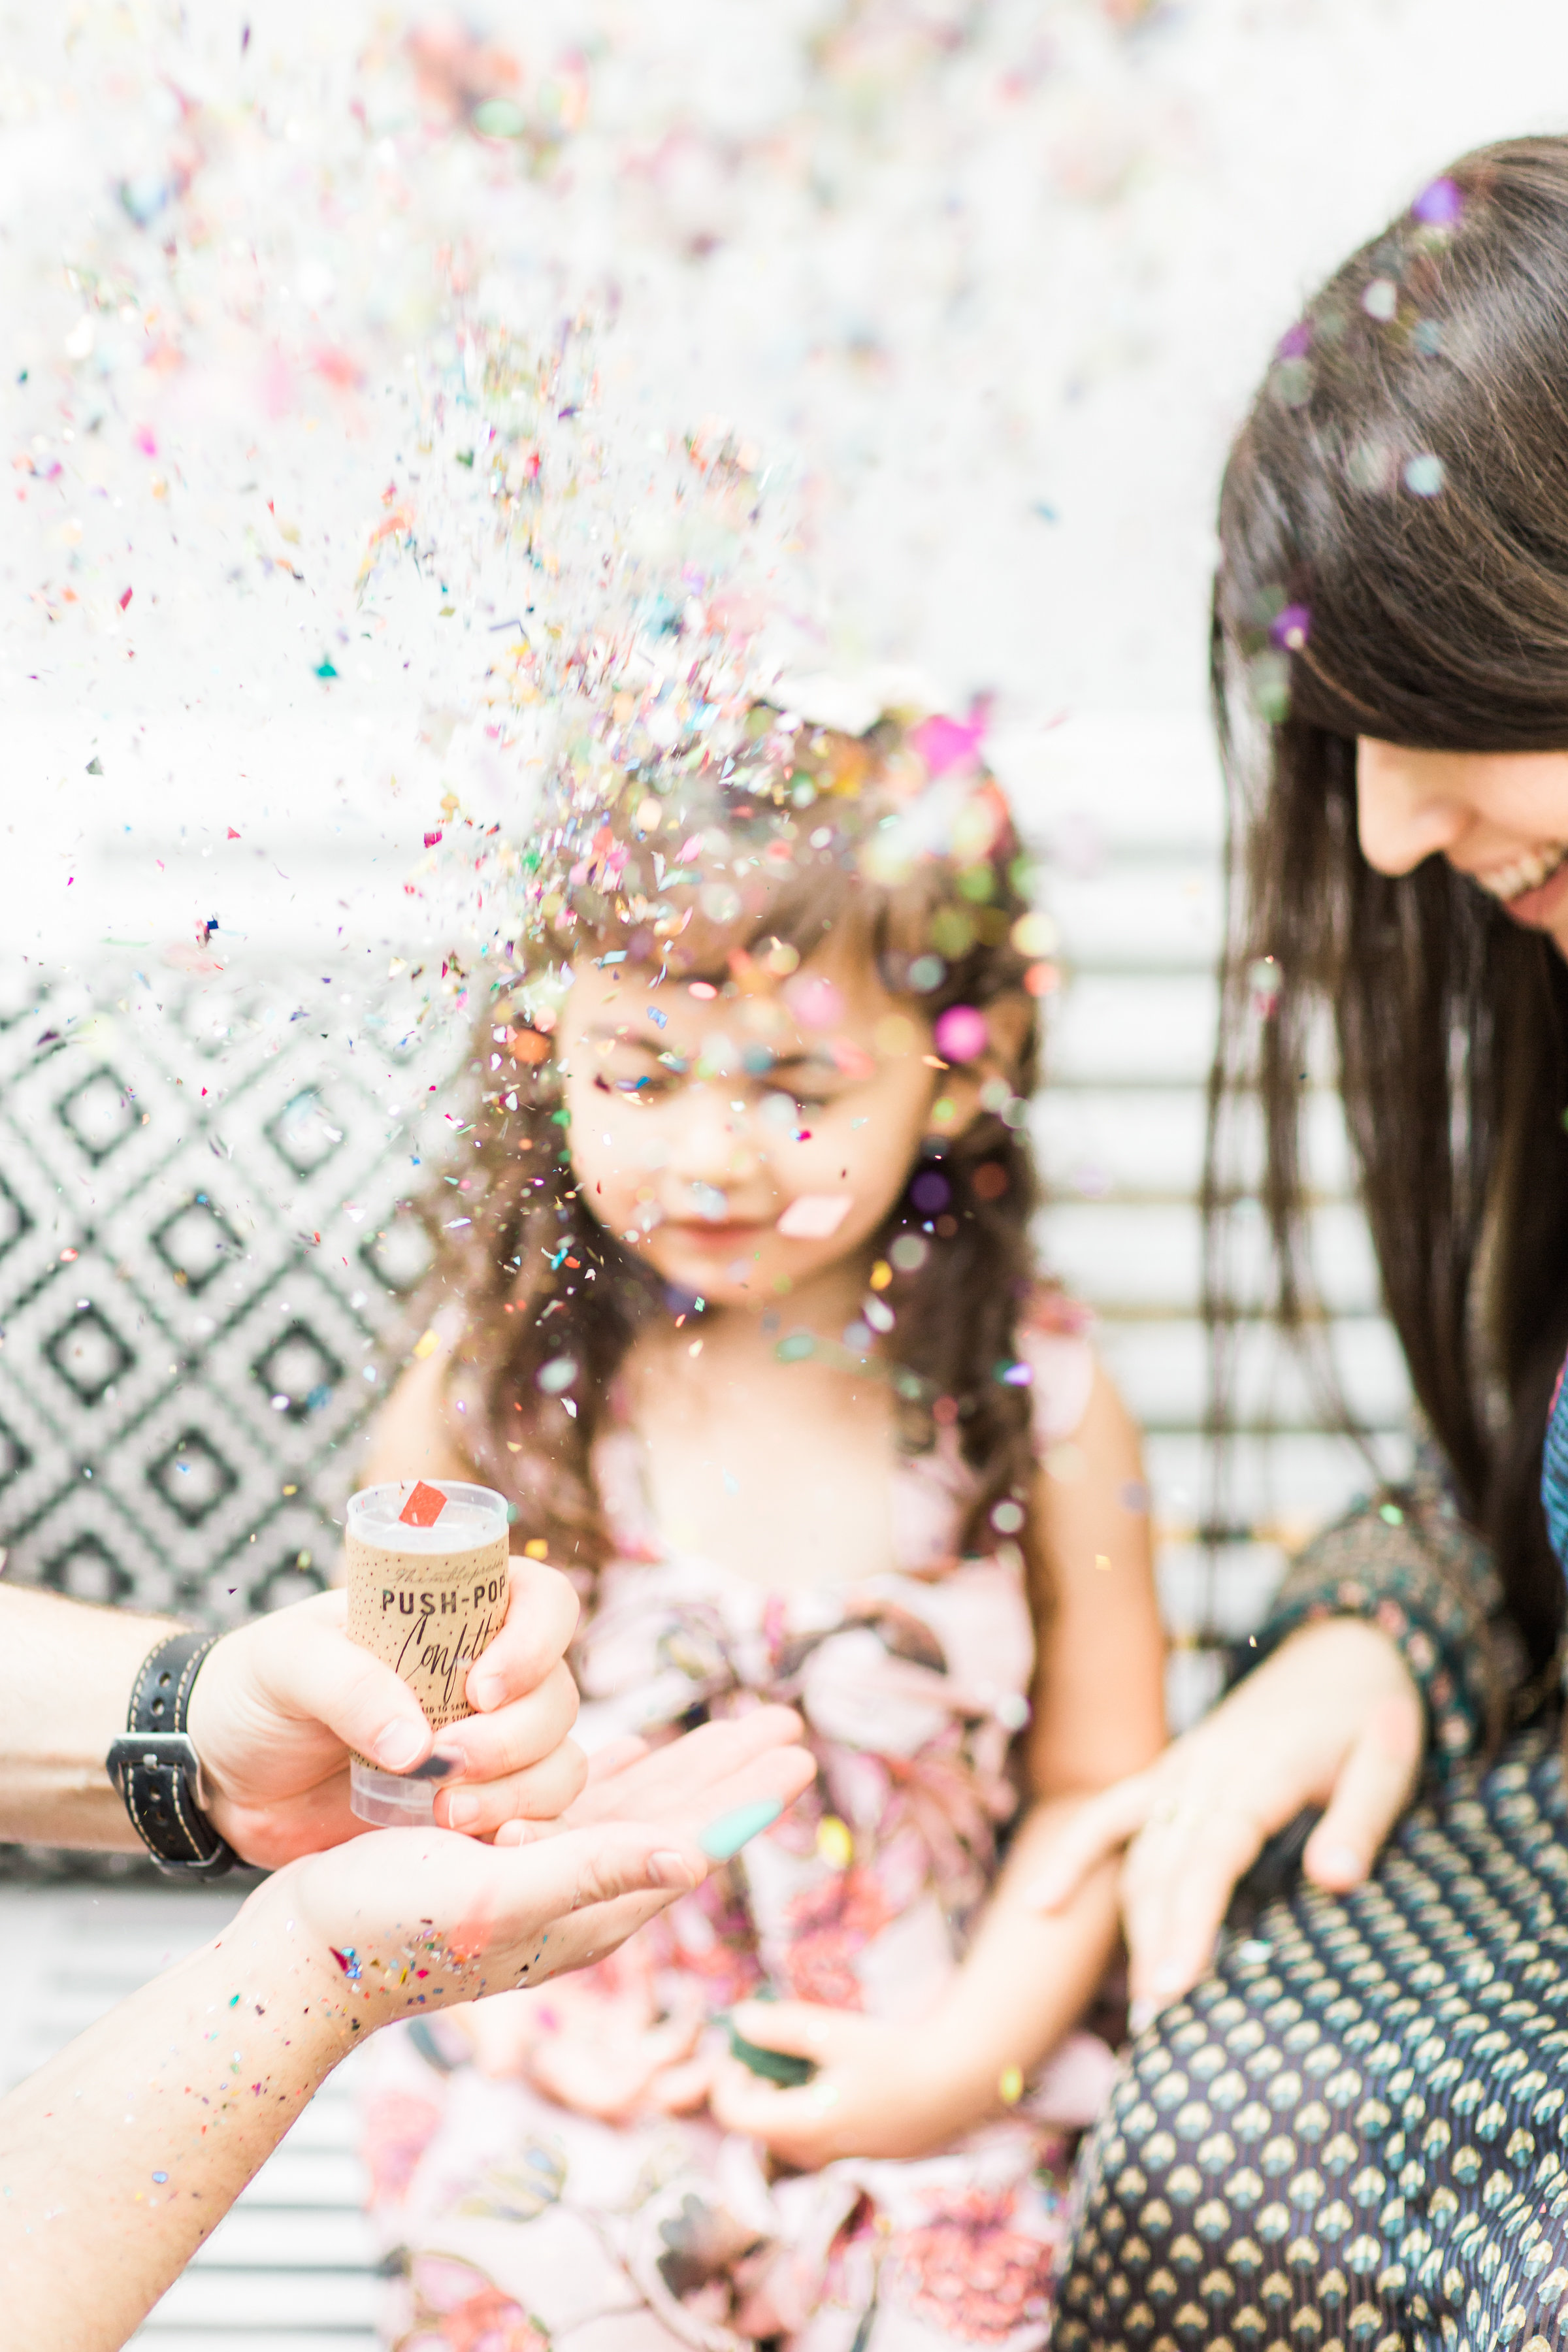 Behind-the-scenes of a magical, whimsical little girl's mermaid birthday party, complete with mermaid dessert bar, games, prizes, and crafts. Click through for the details. | glitterinc.com | @glitterinc